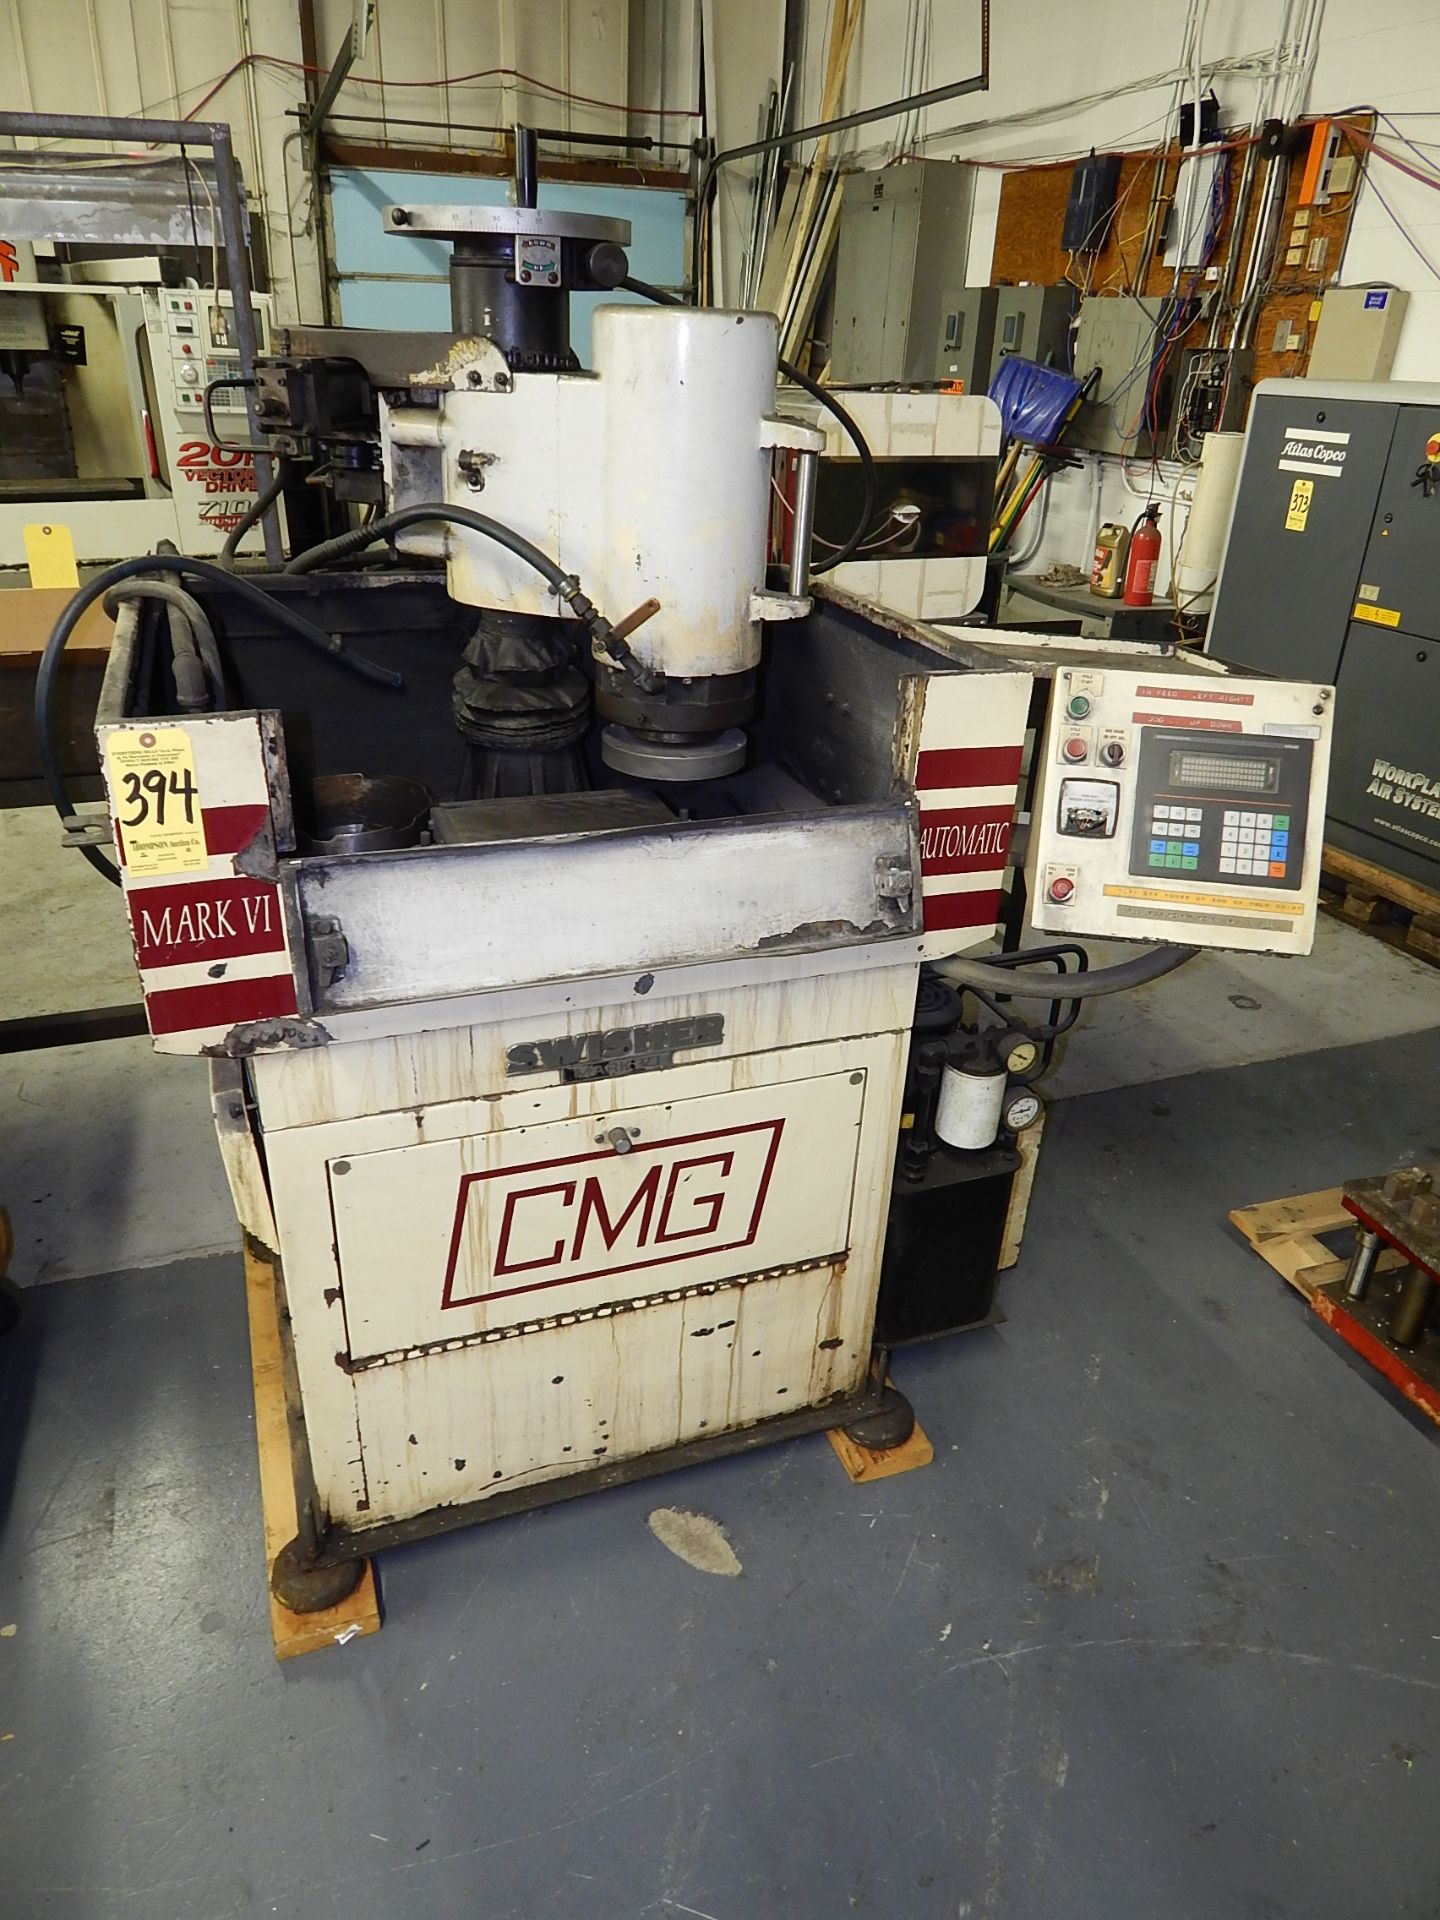 Swisher/CMG Mark VI Automatic Precision Surface Grinder, Vertical Spindle, s/n 923610199, Sweeping